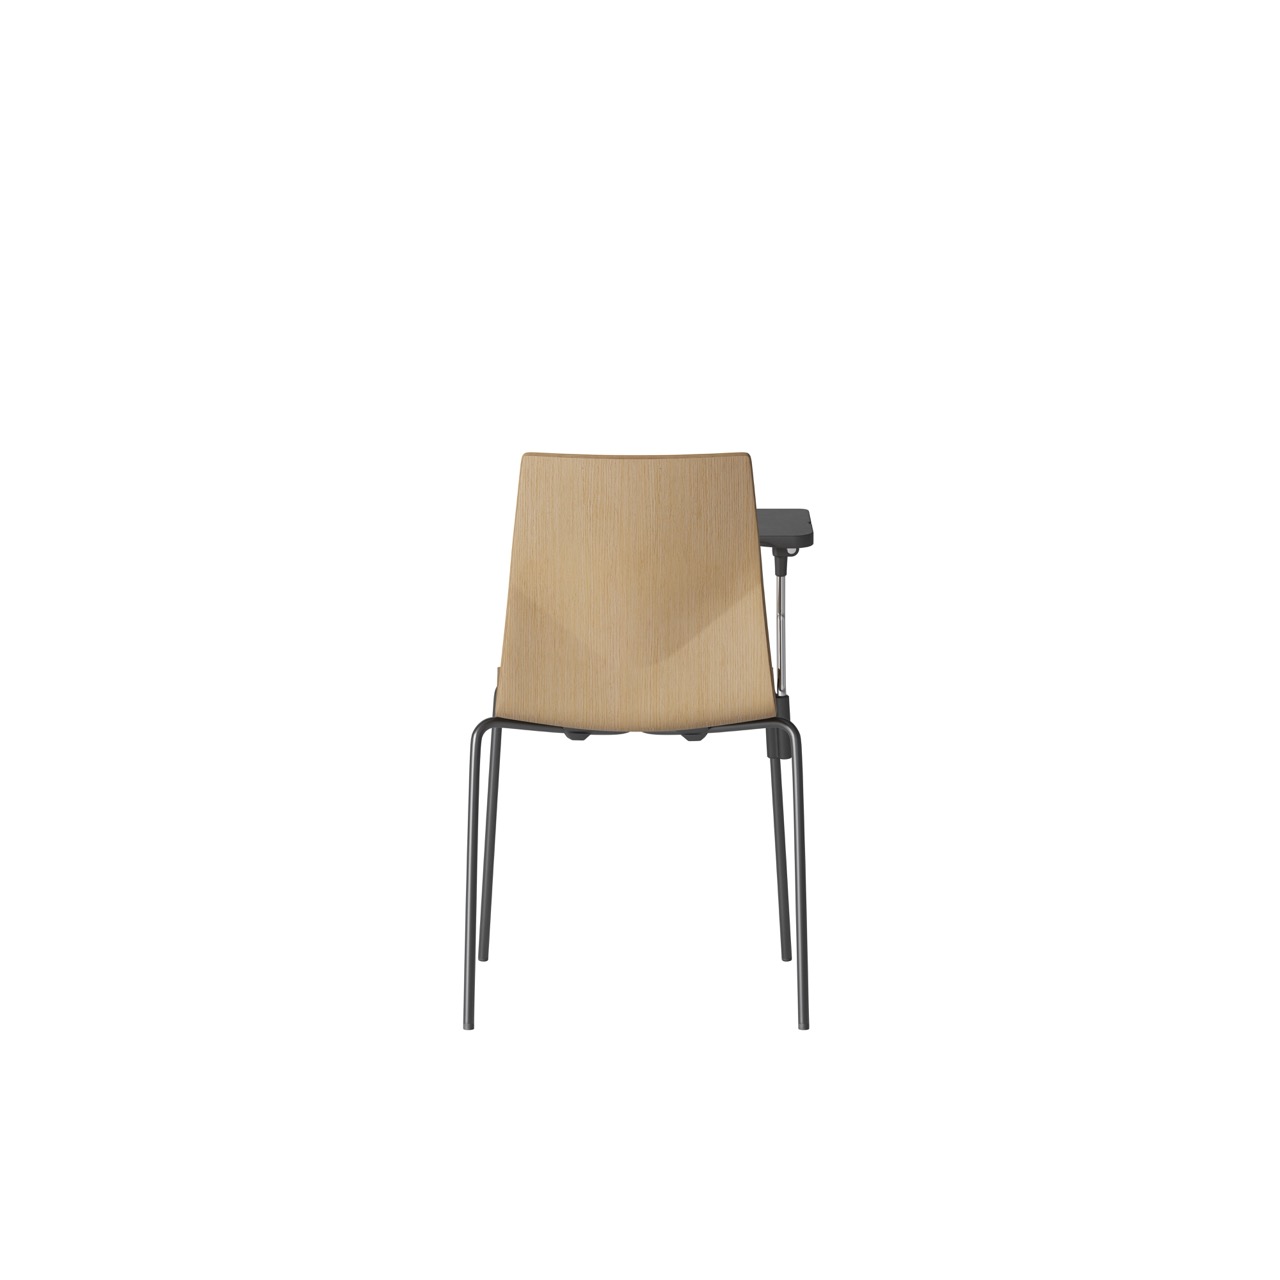 OCEE&FOUR – Chairs – FourCast 2 Four – Veneer shell - Inno Note - Packshot Image 1 Large